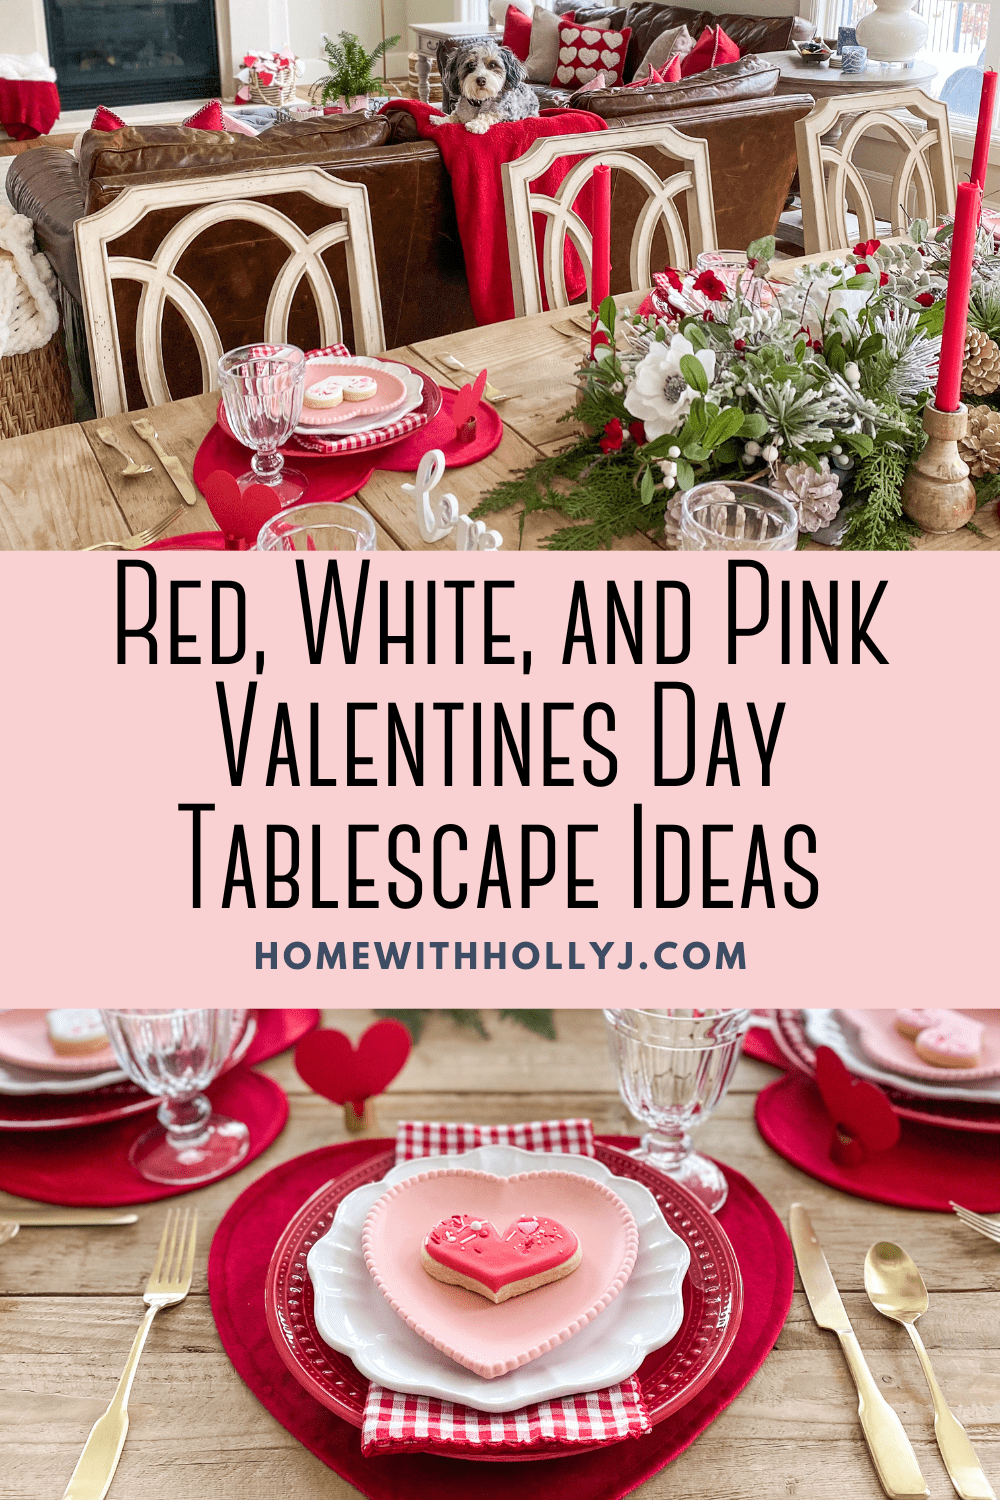 Sharing red, white, and pink Valentines Day tablescape ideas to make the month of love extra special. Get inspired here.